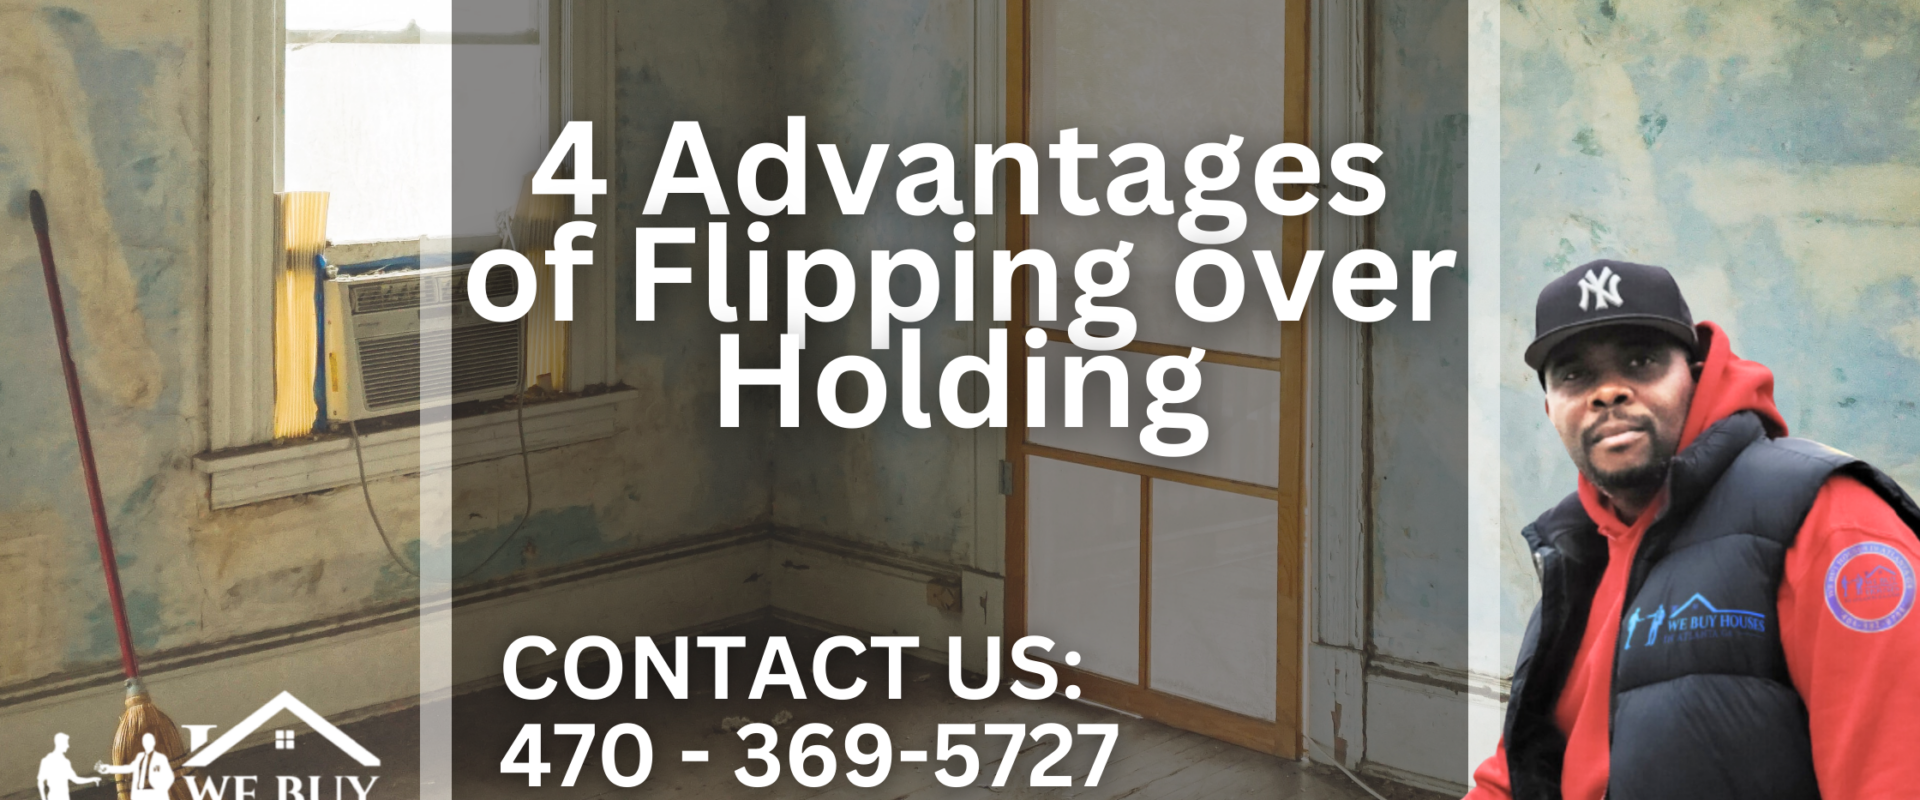 4 Advantages of Flipping over Holding